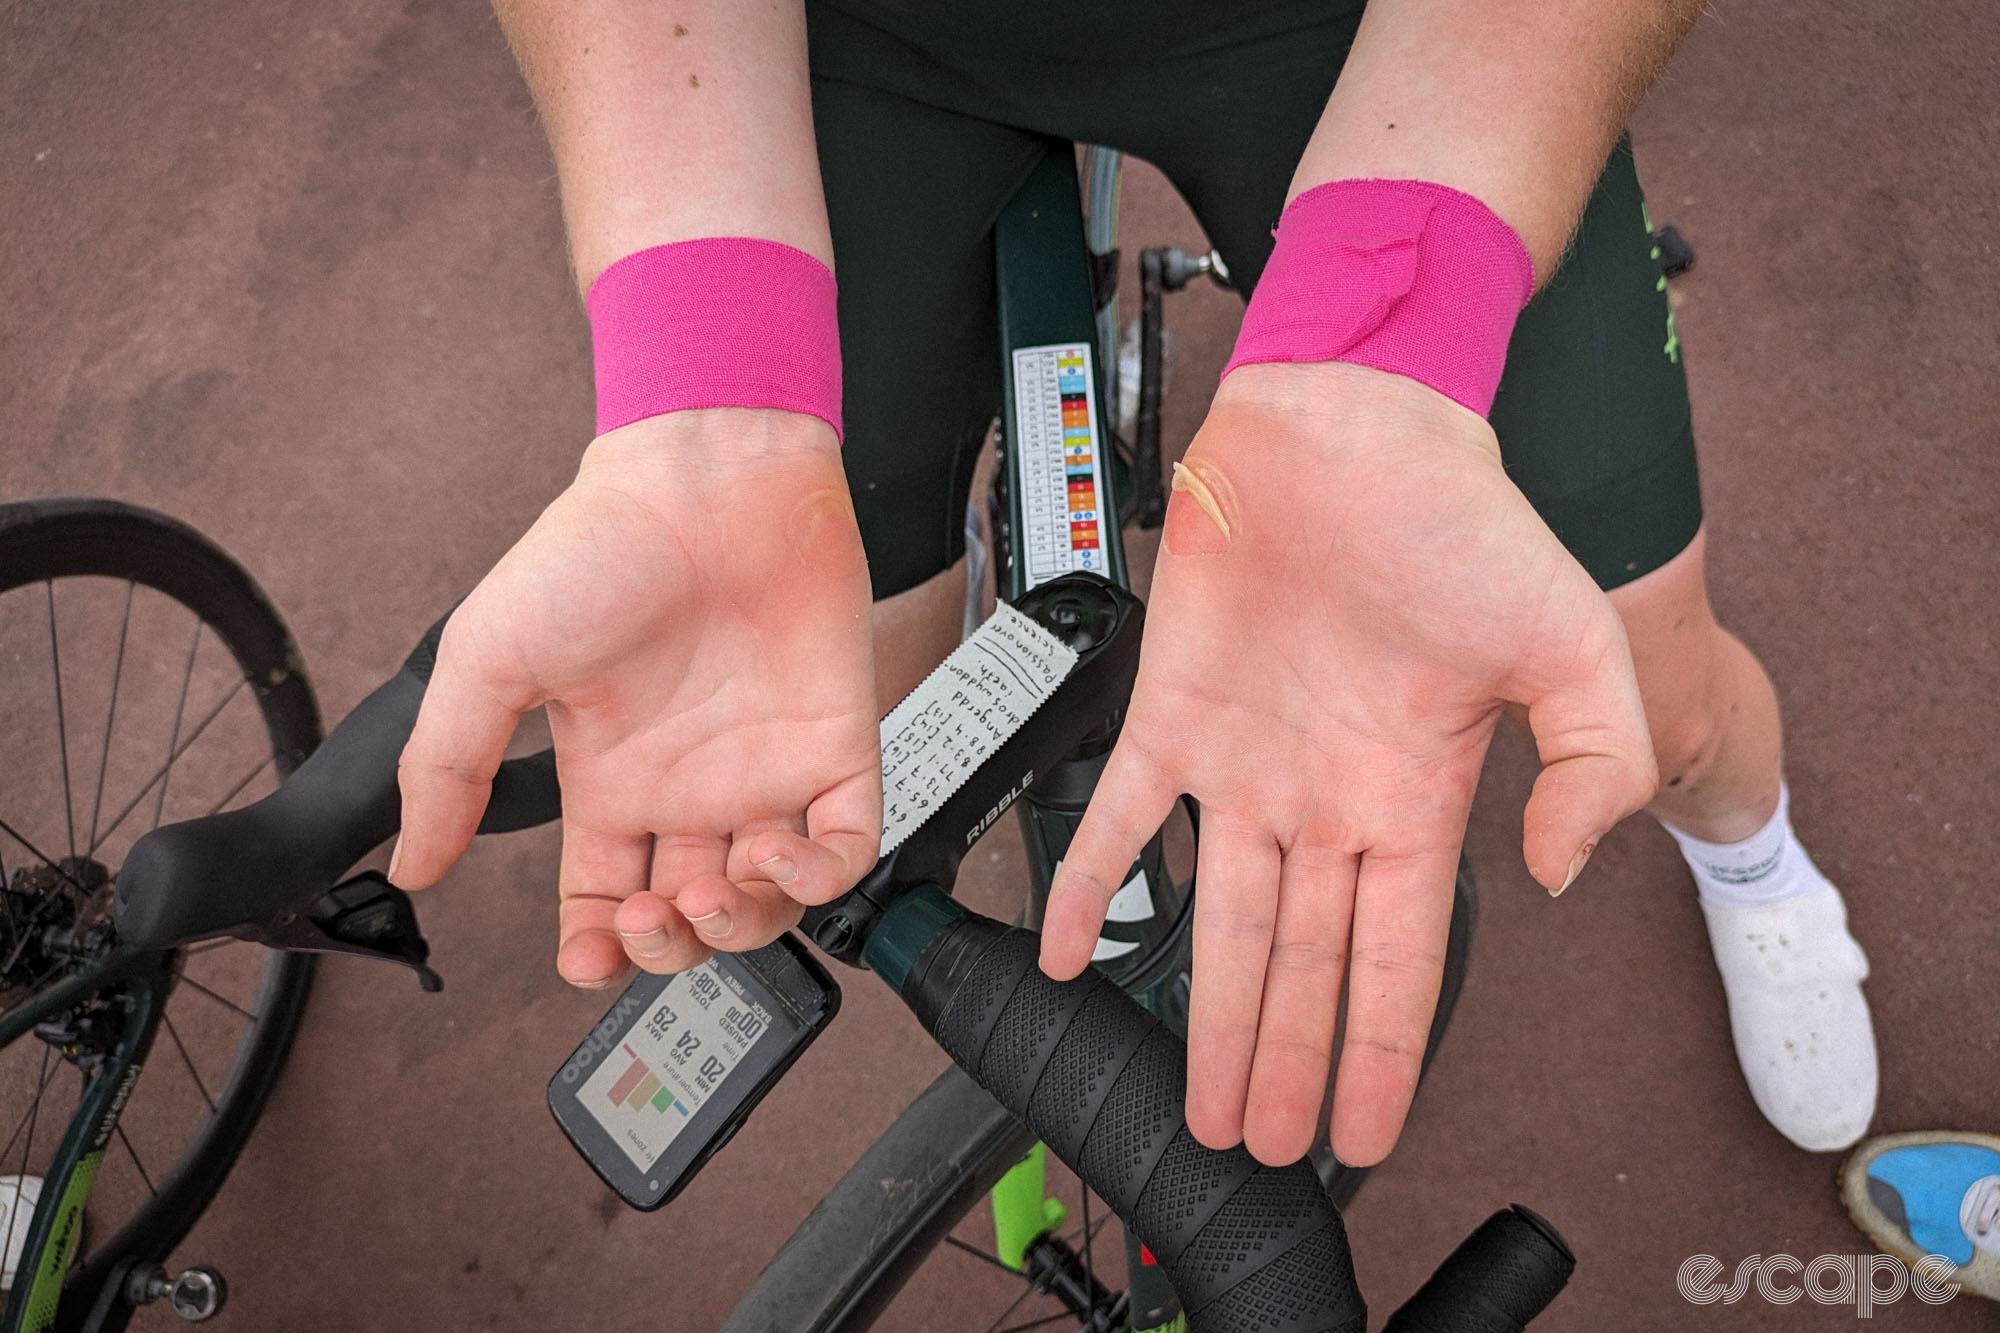 Elenud King's hands feature red marks on the palm pads and a large blister on the outside pad of each. Her wrists are wrapped in hot pink kinesiotape.